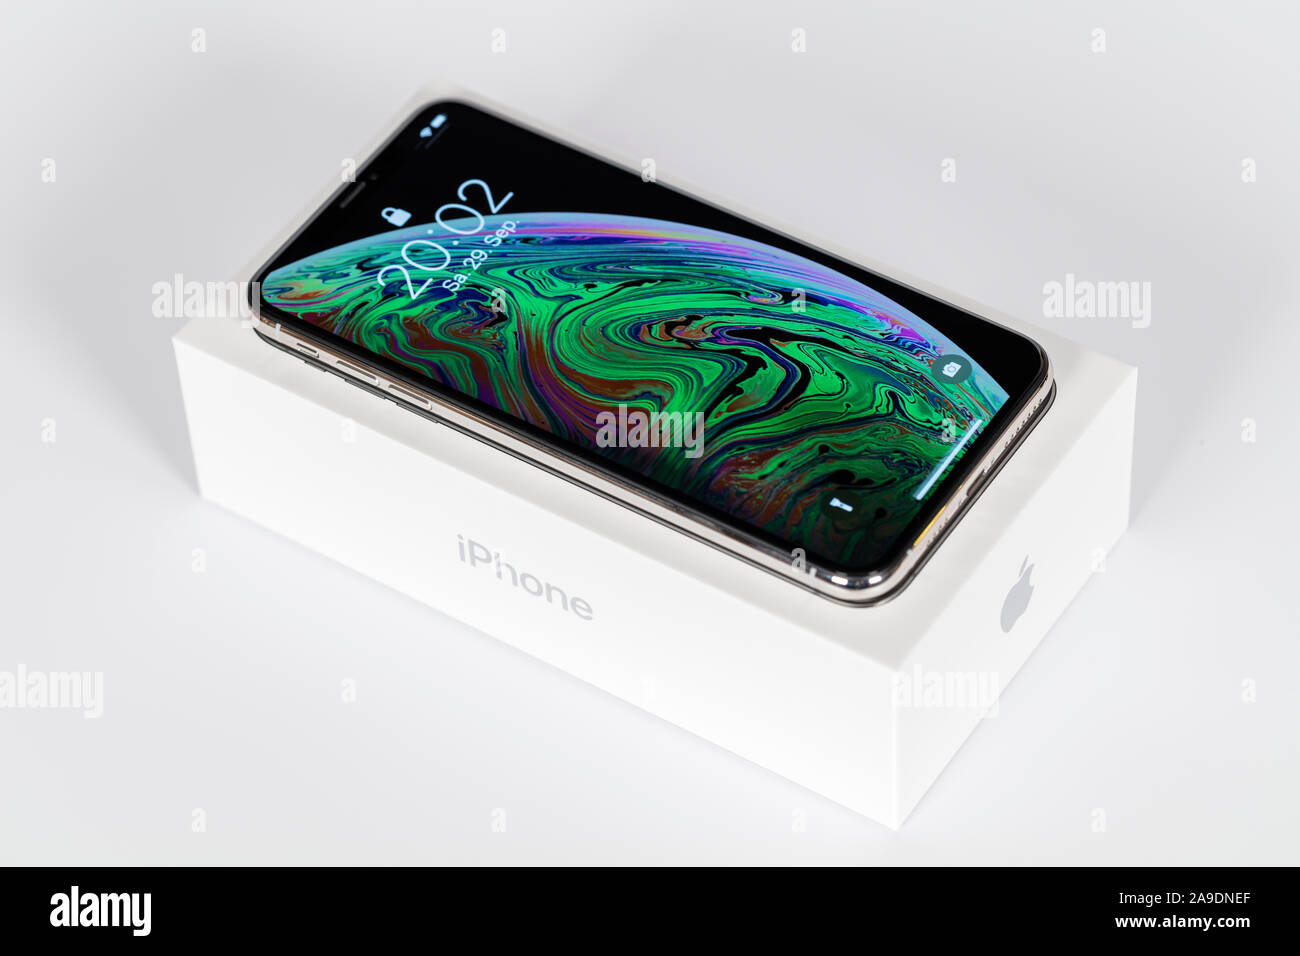 Apple iPhone XS Max, Original packaging, Display, Apps, Programs,  Multi-touch feature Stock Photo - Alamy